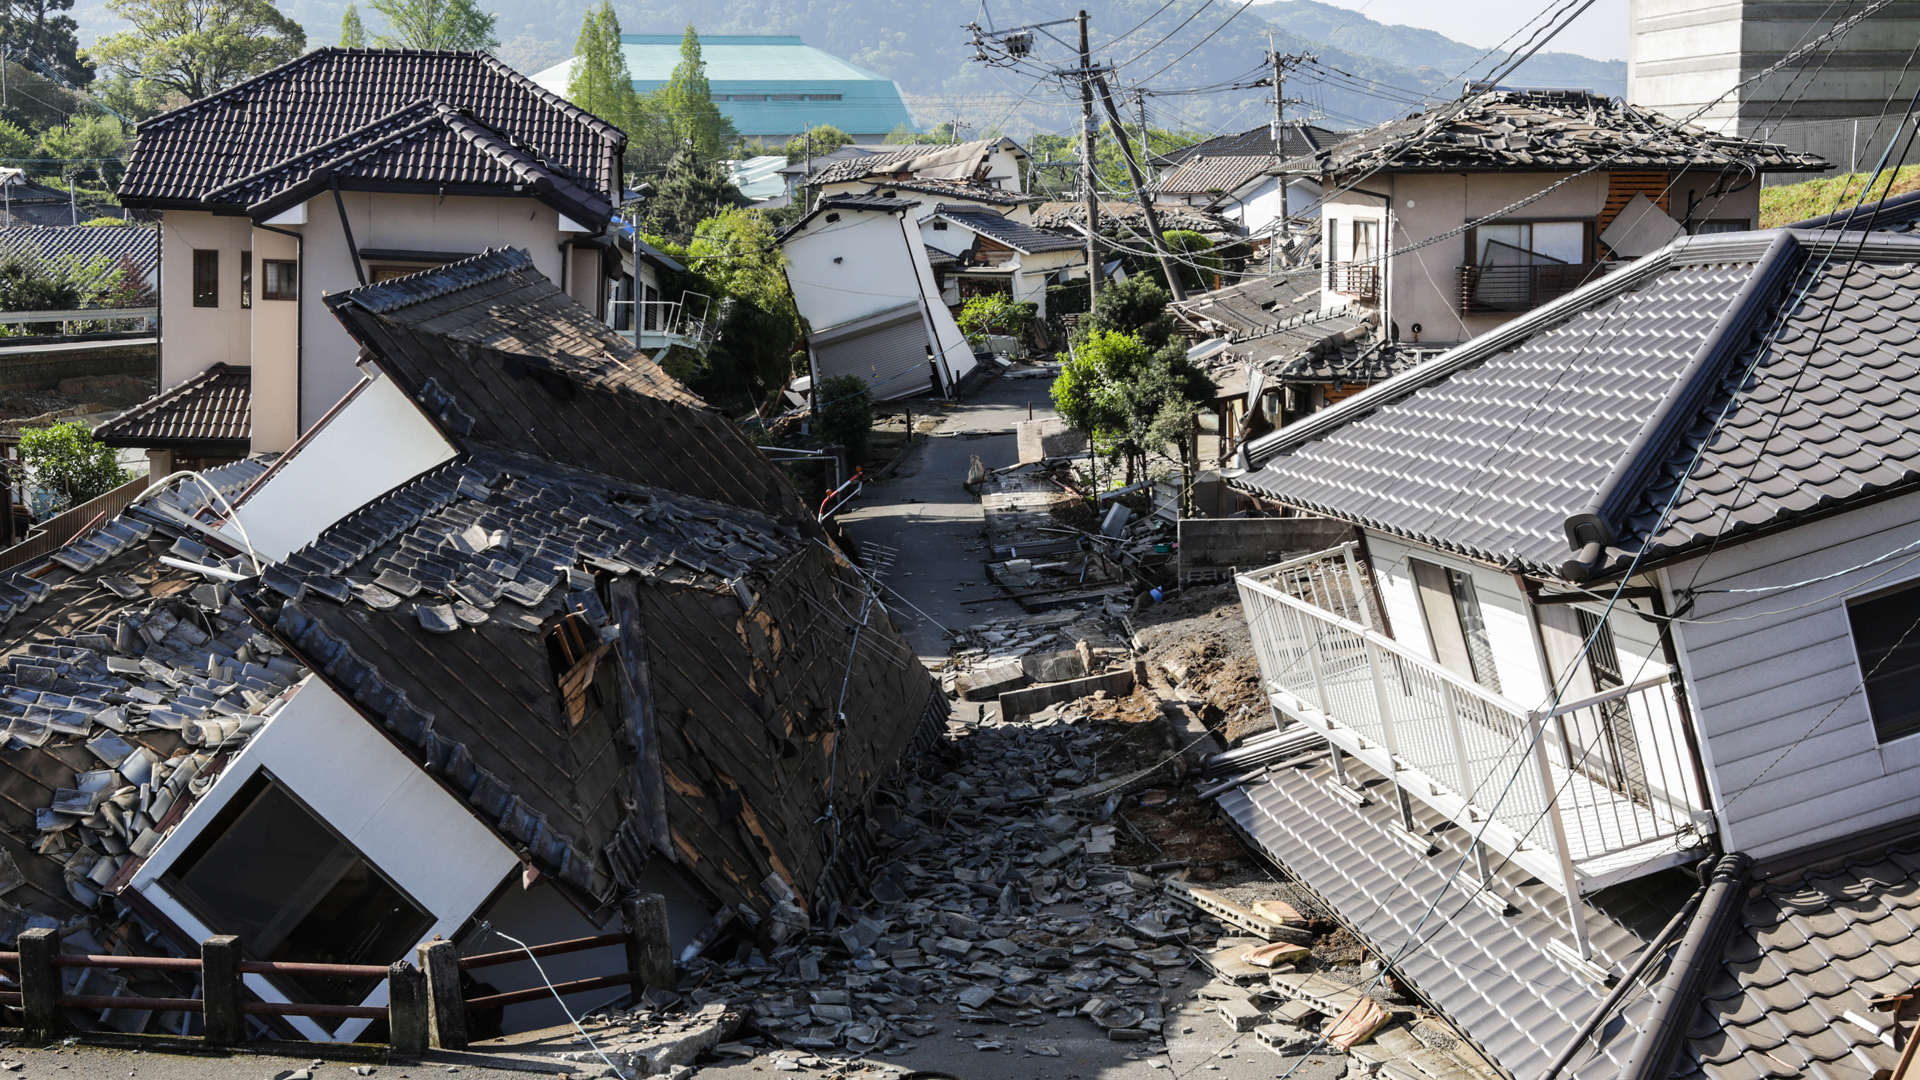 Houses Are Seen Destroyed After A Recent Earthquake - Earthquakes In Japan 2016 , HD Wallpaper & Backgrounds